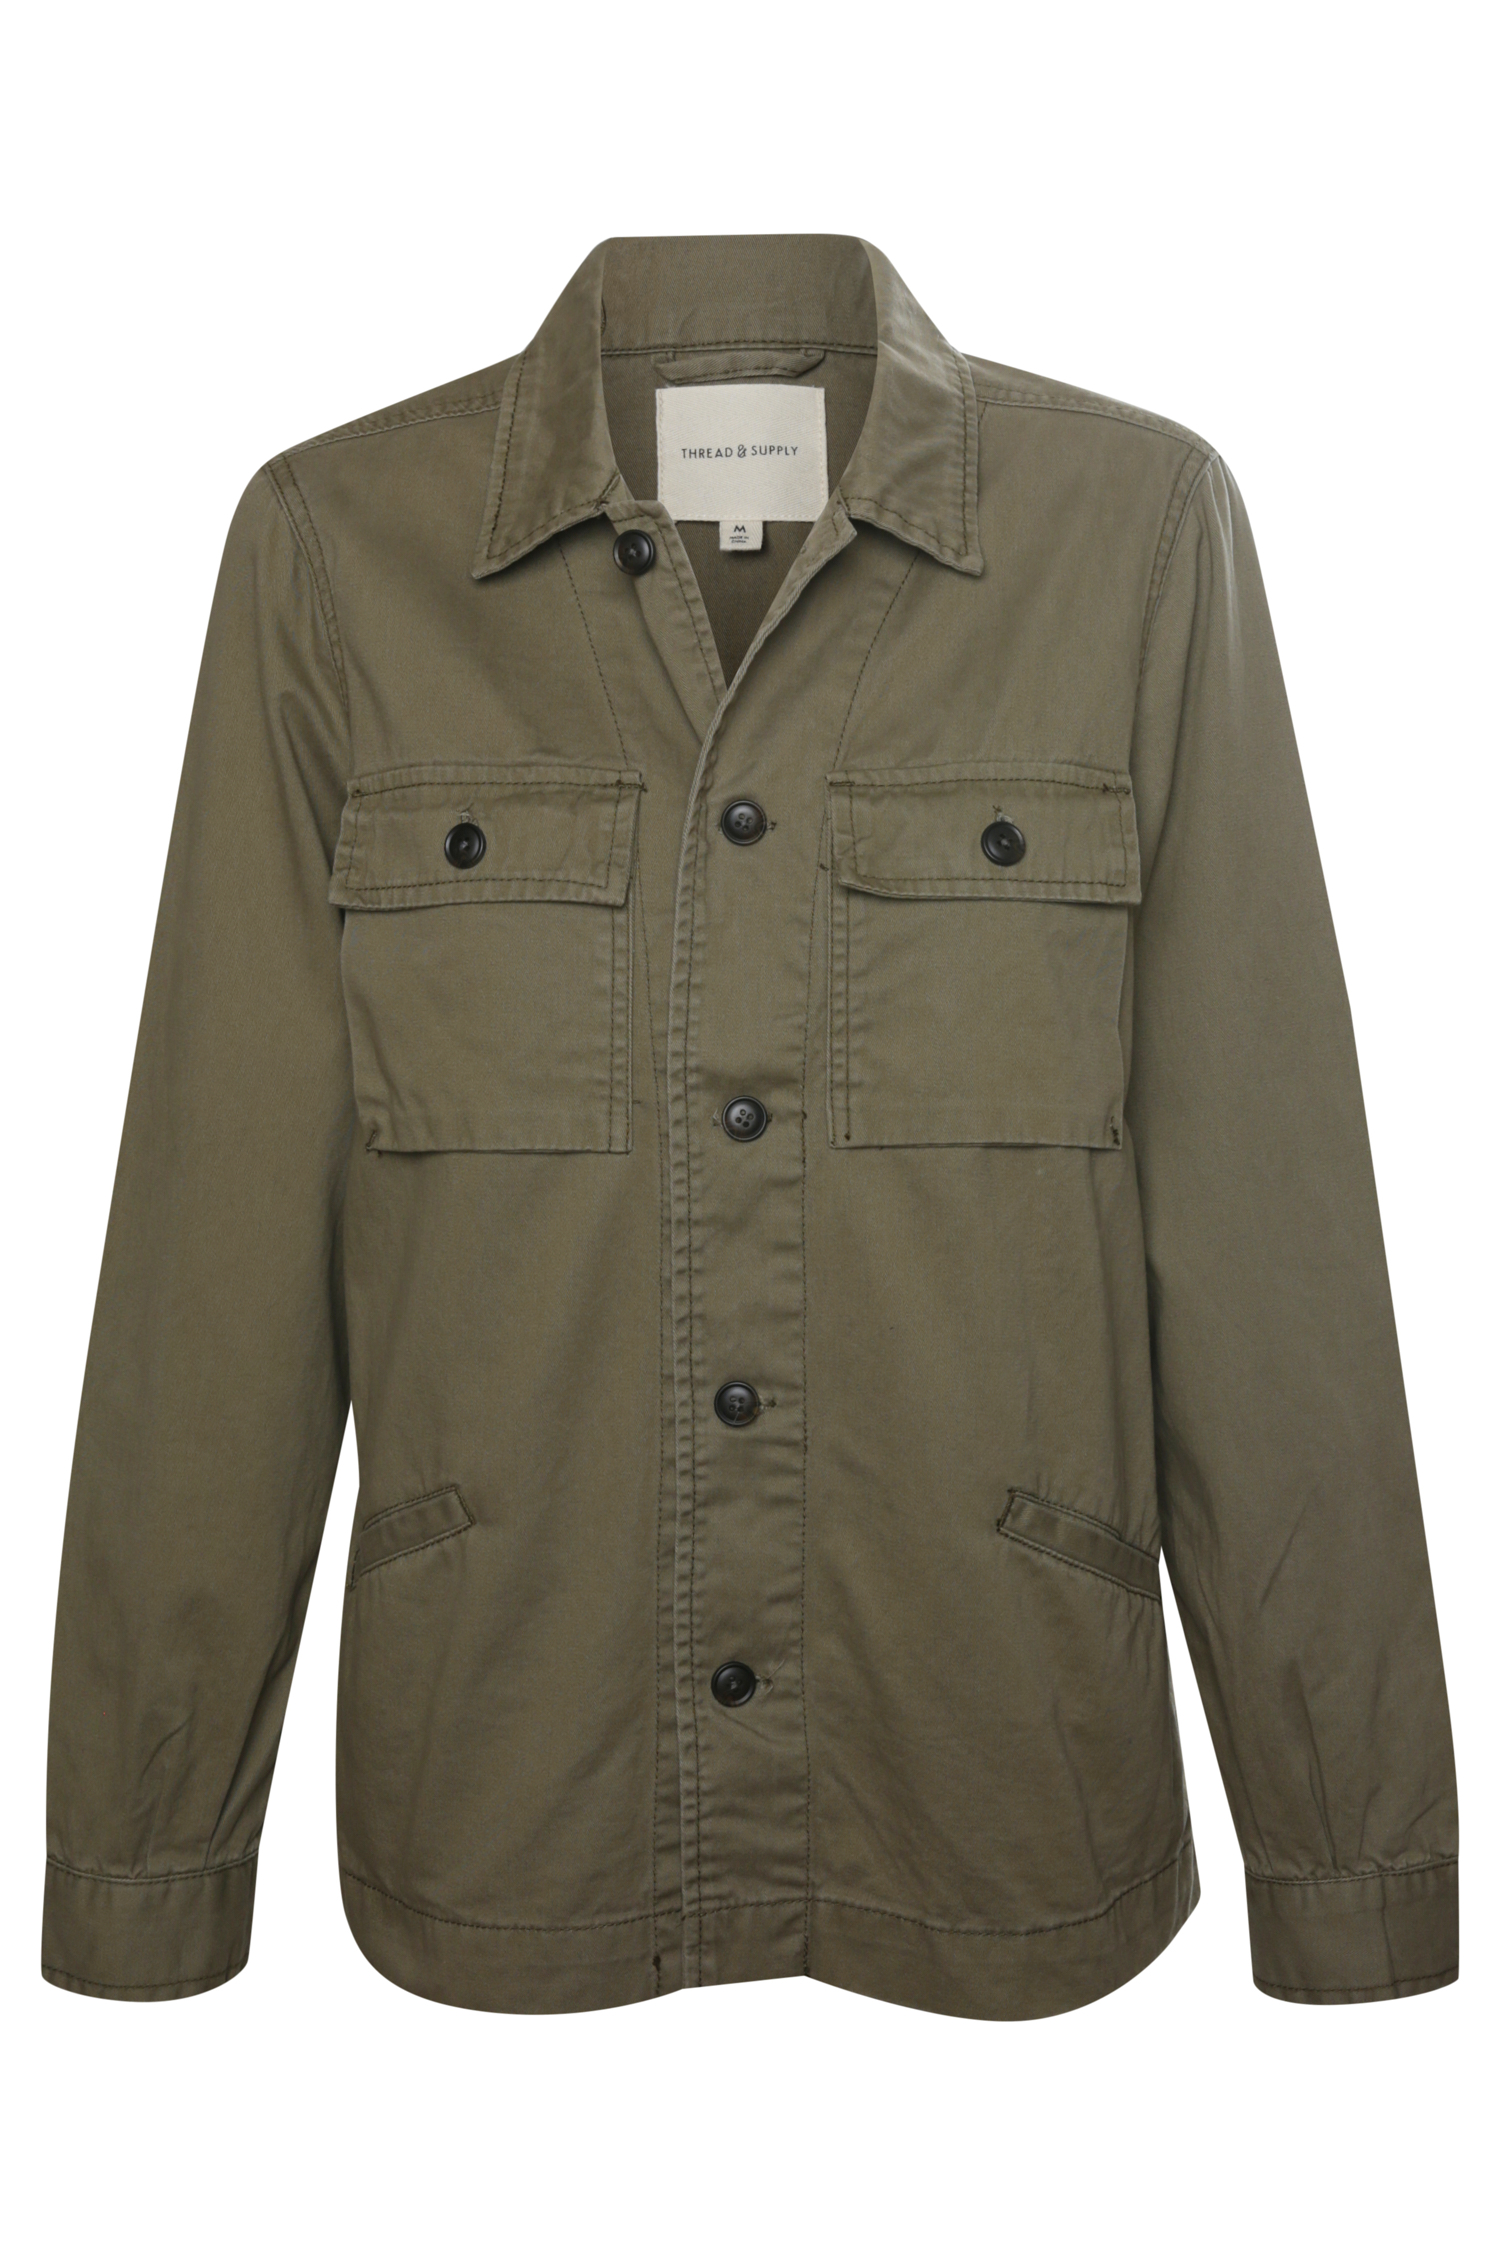 Thread & Supply Military Utility Jacket in Olive S